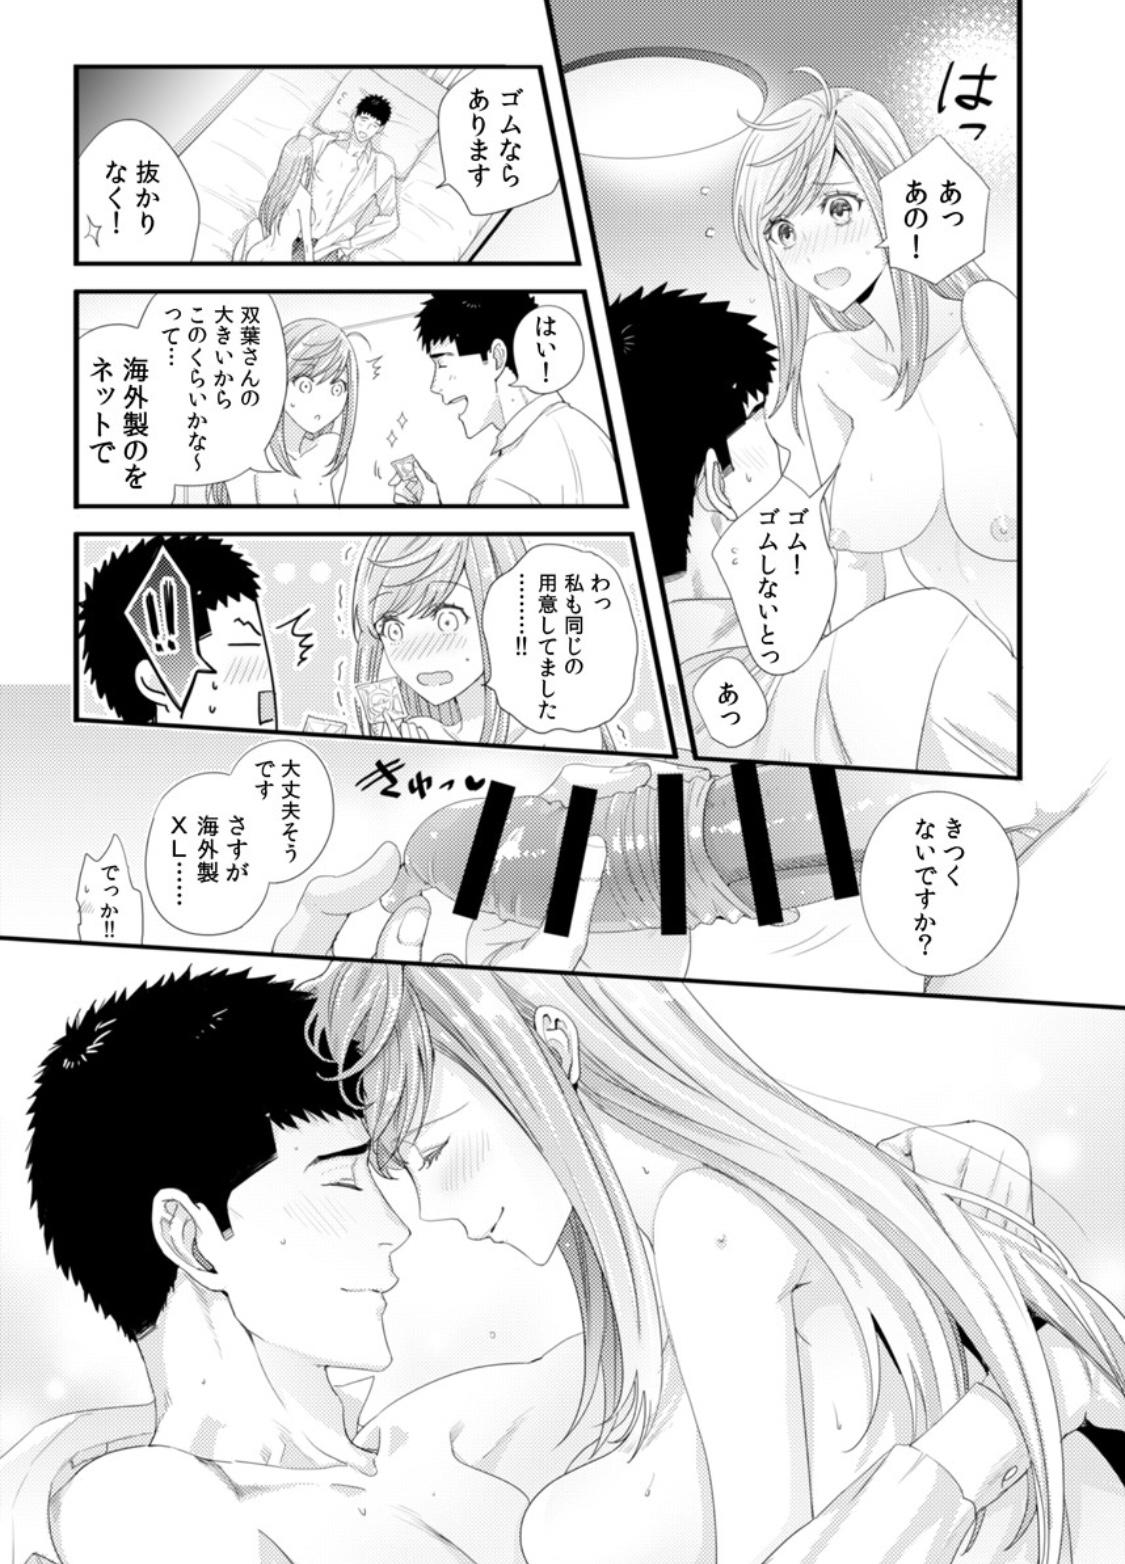 Please Let Me Hold You Futaba-San! Ch. 1-4 56